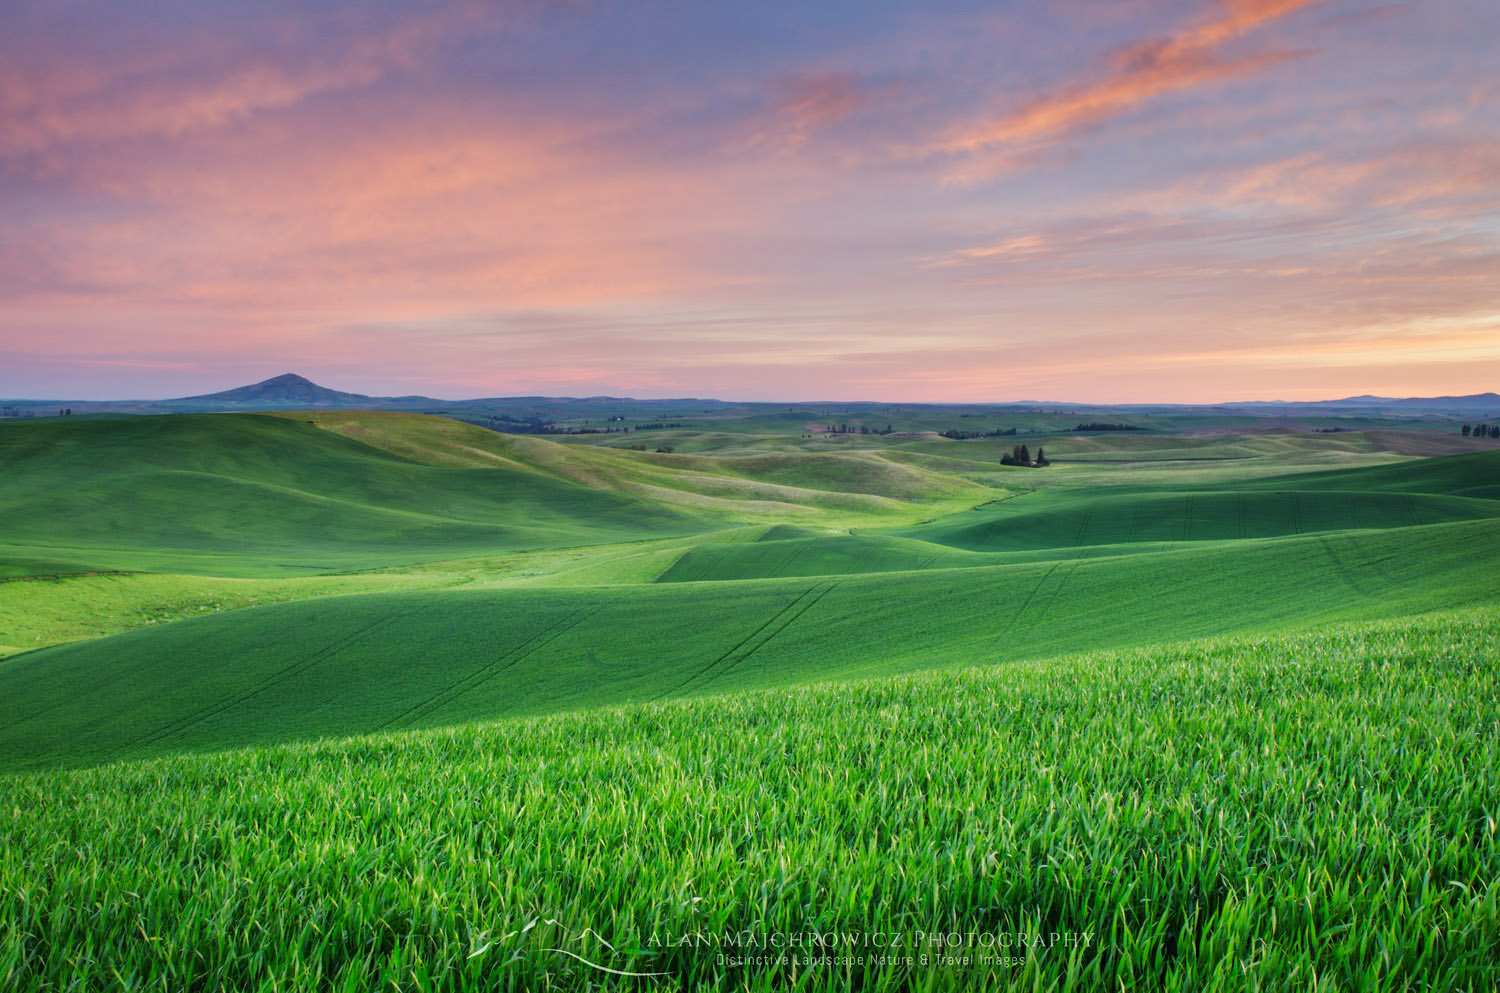 Wheatfields in the Palouse region of the Inland Empire of Washington #51565